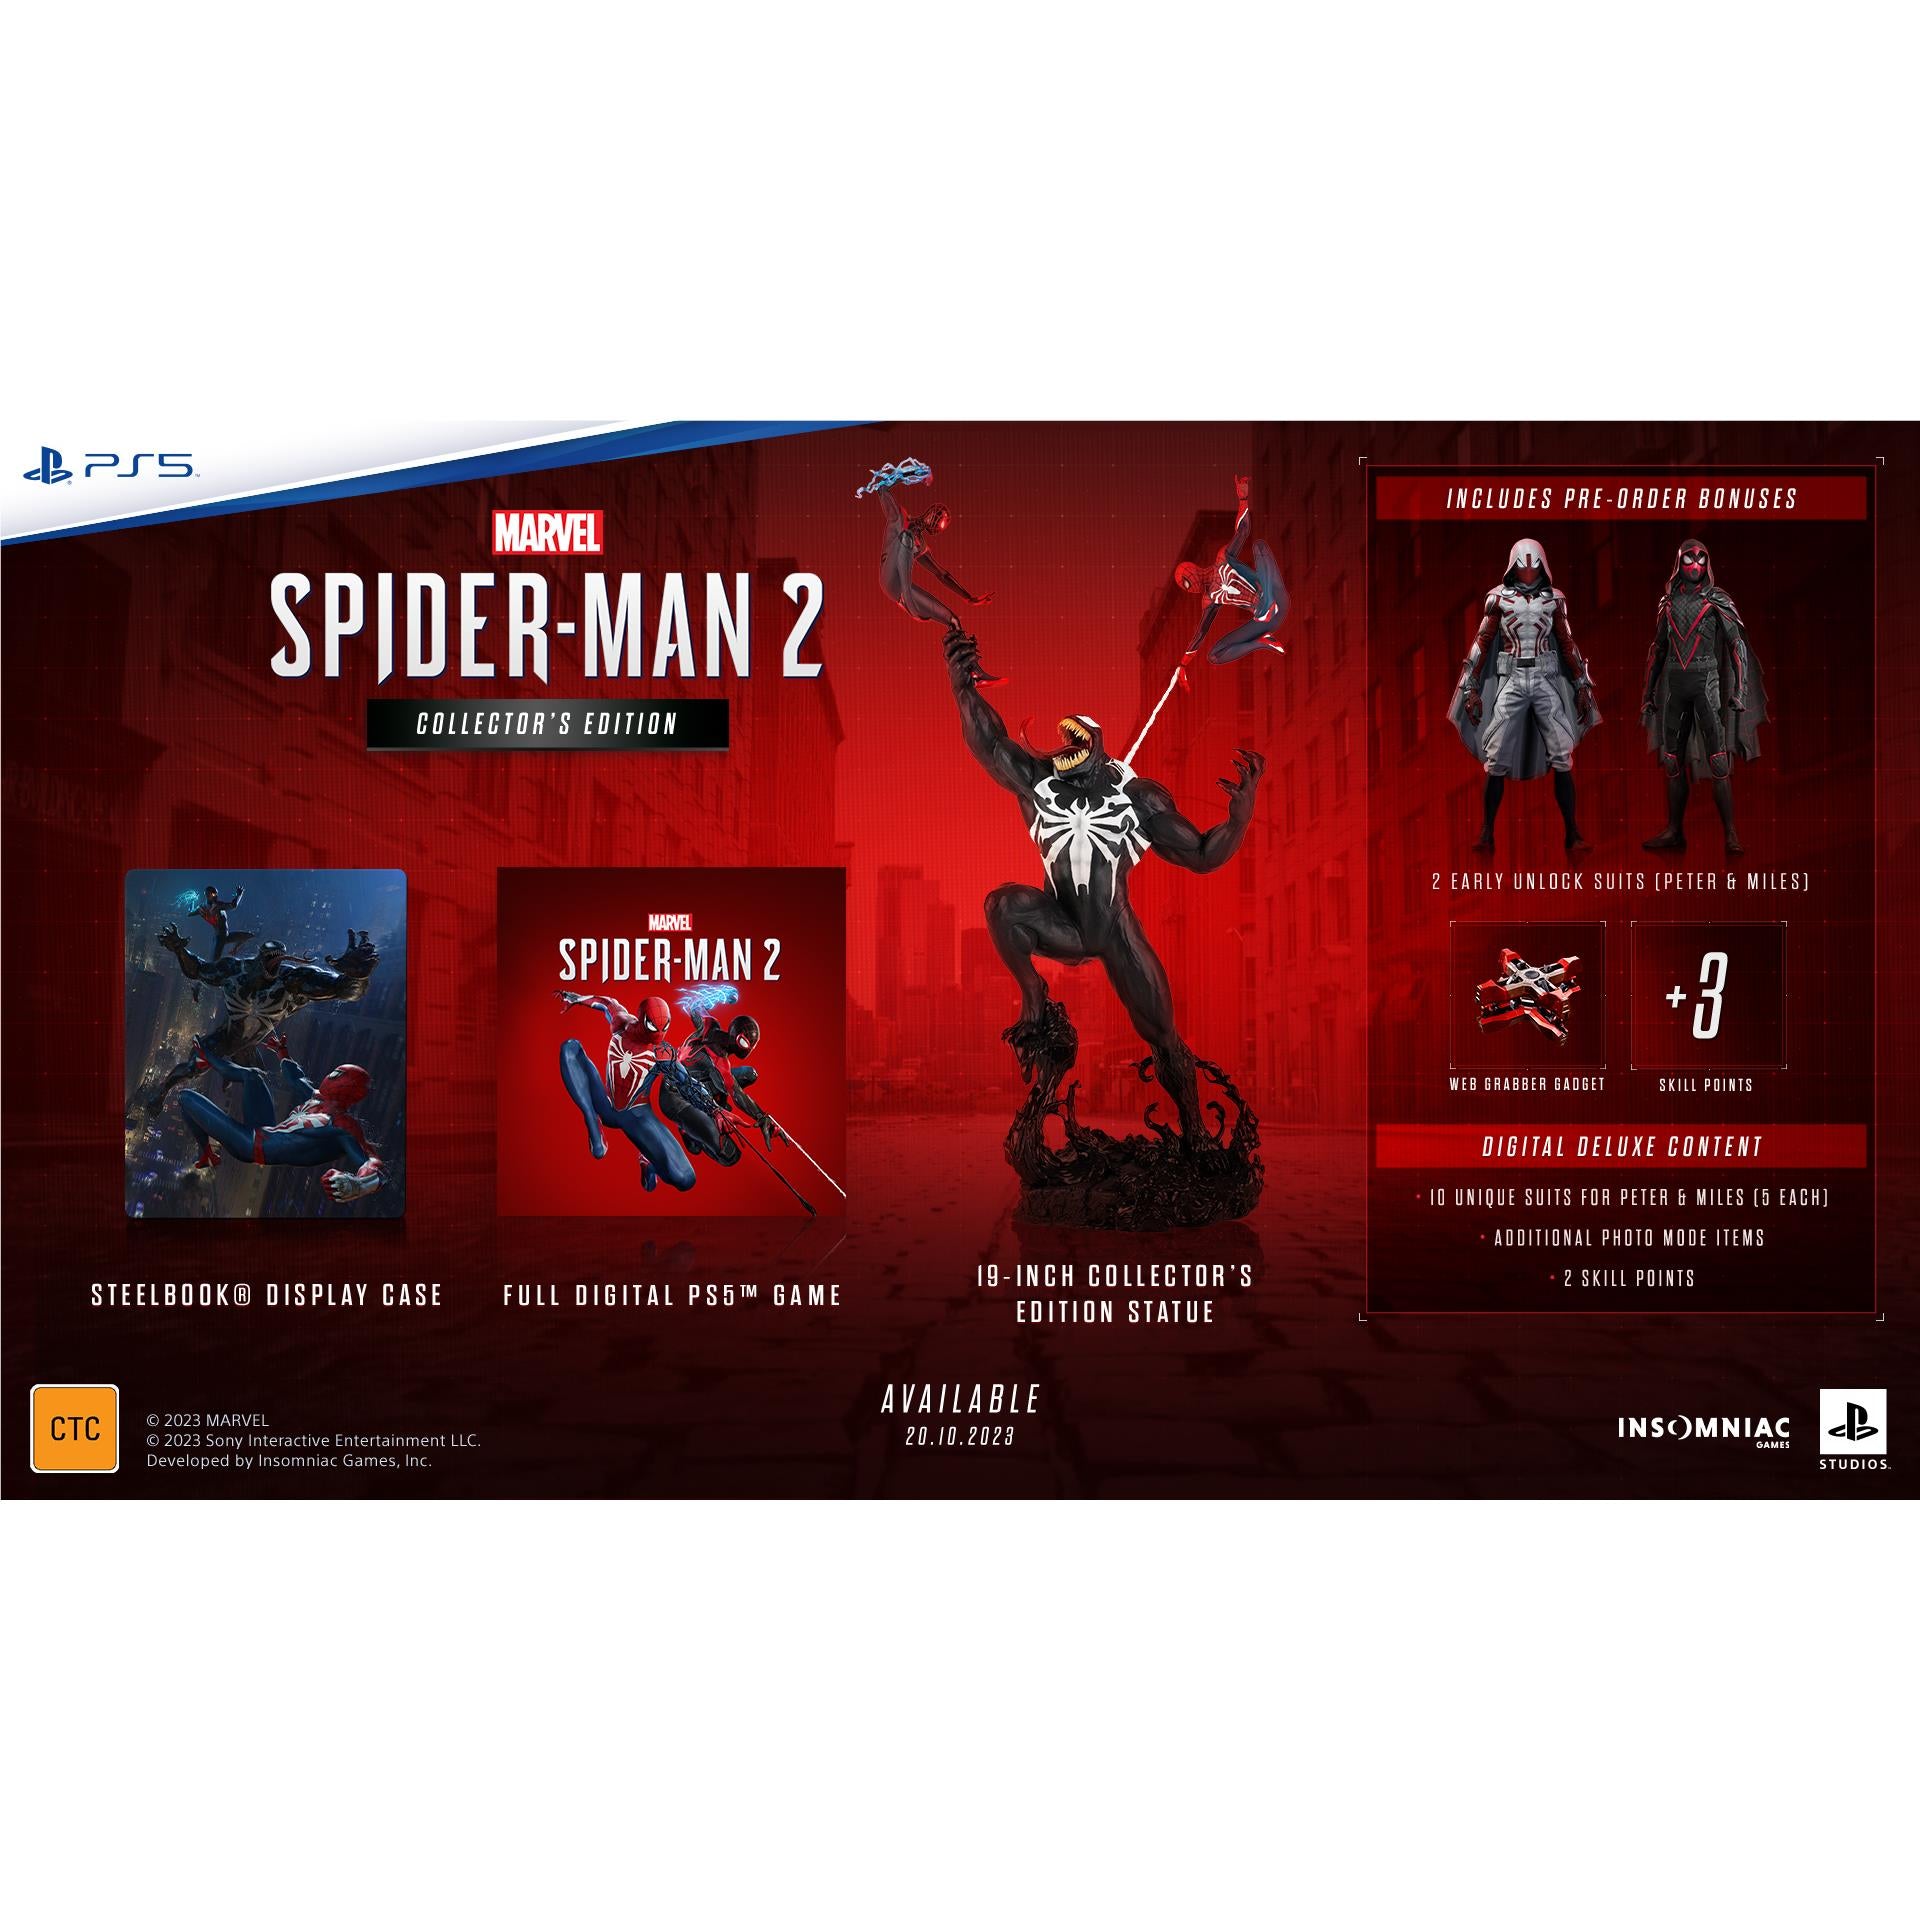 MARVEL’S SPIDER-MAN 2 Collector’s Edition